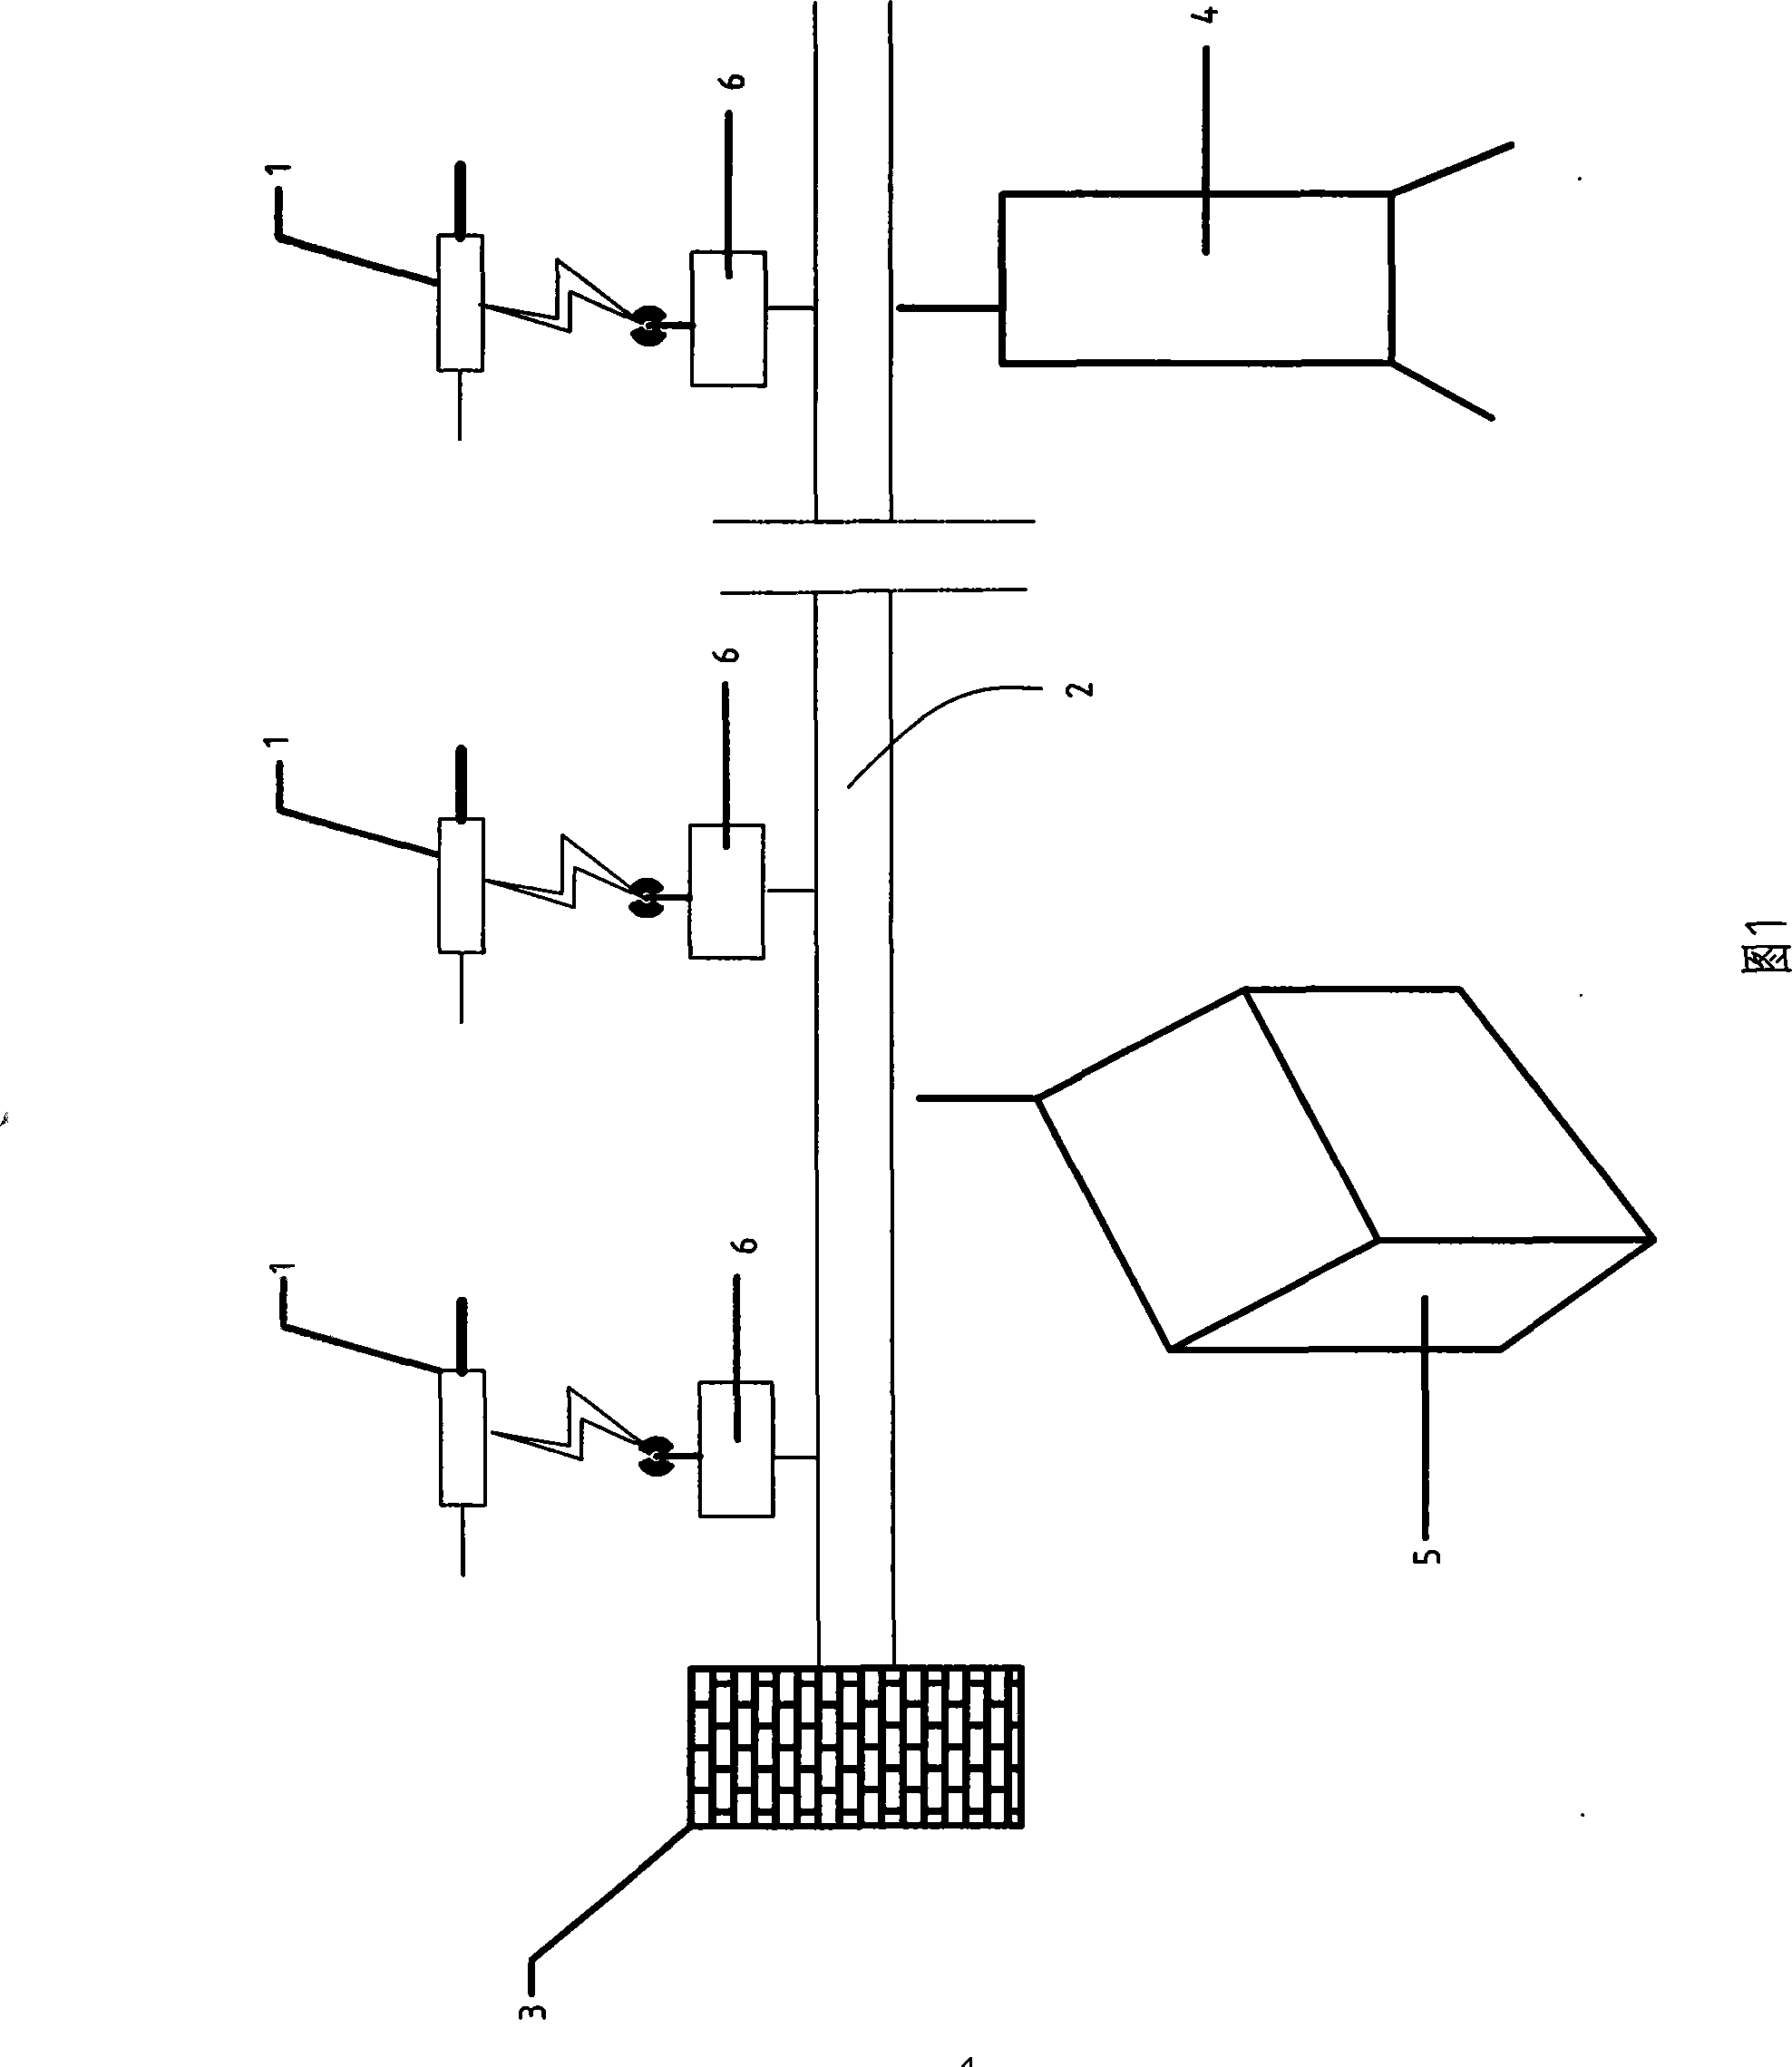 Wireless tool control system and method for vehicle assembly and fabrication technique